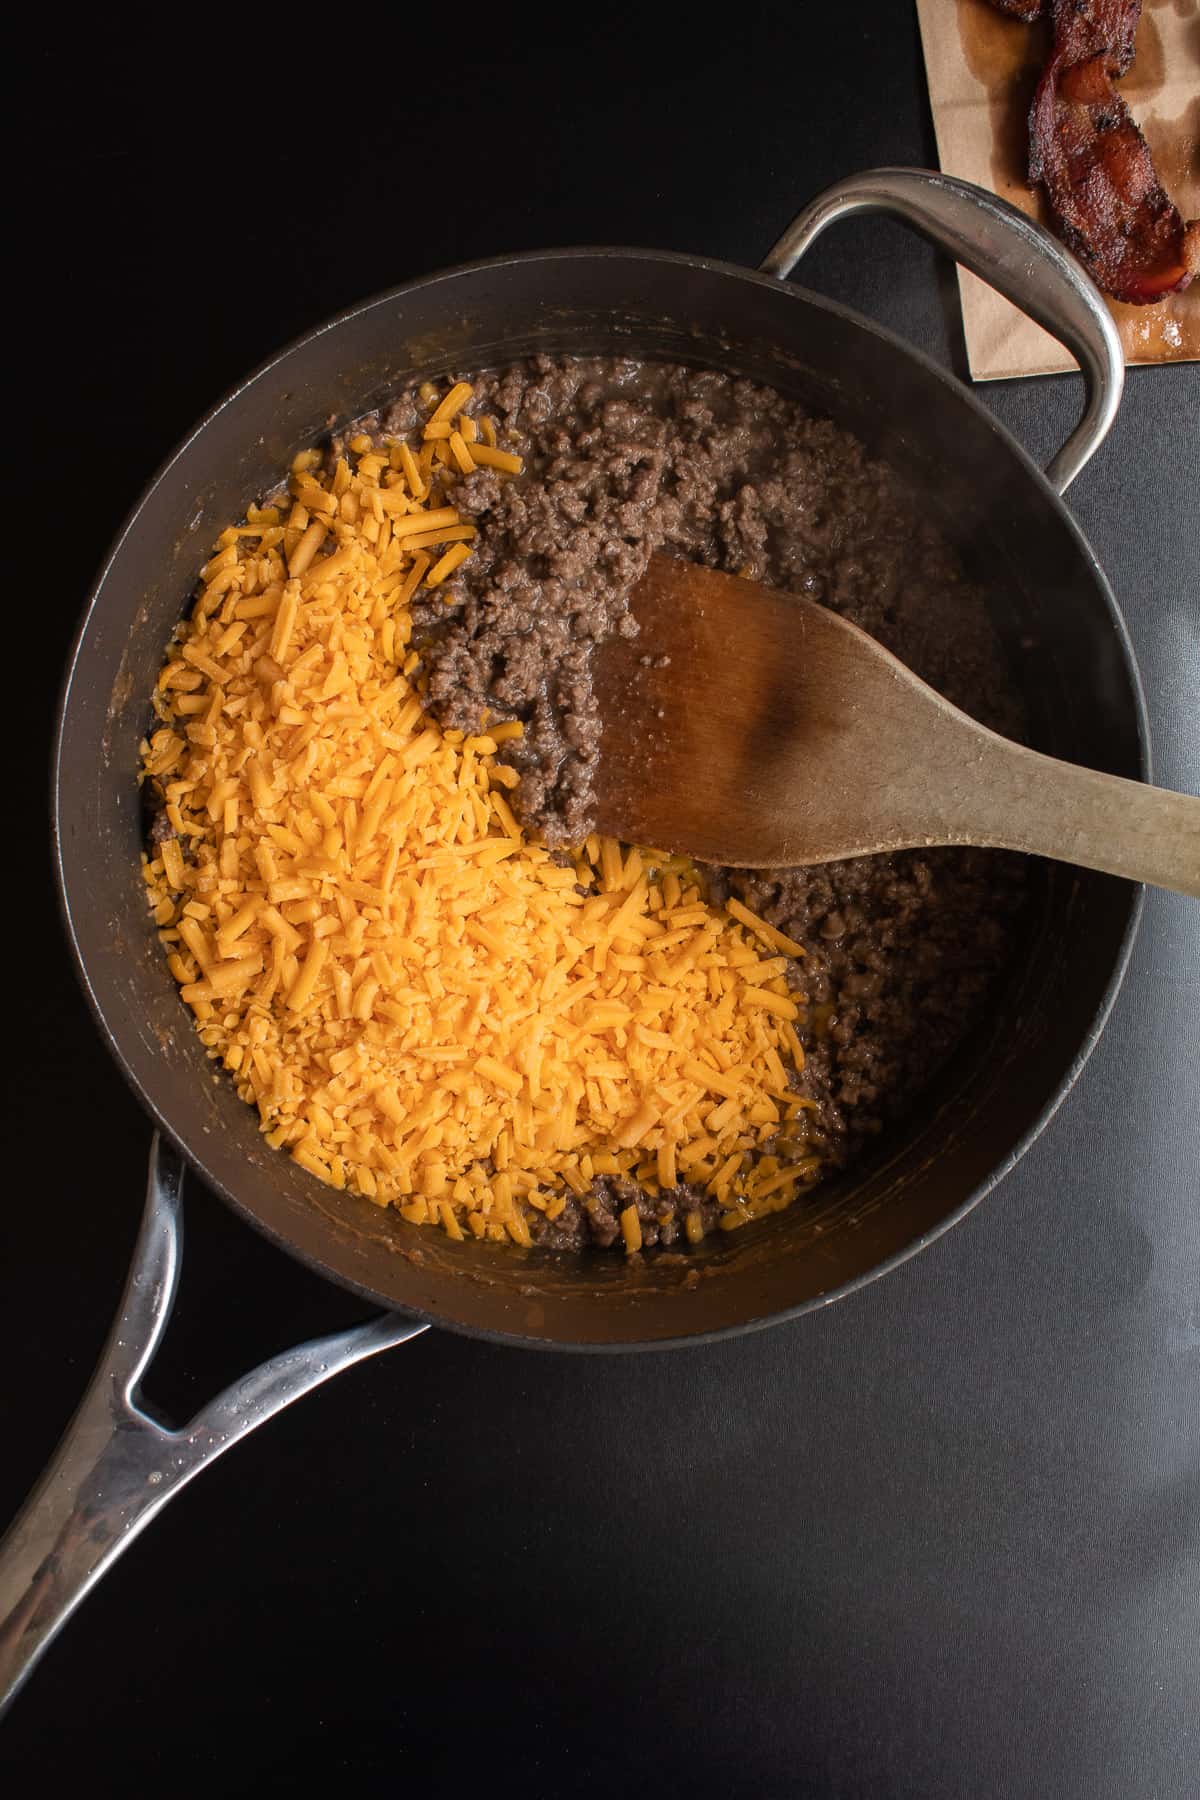 Cheddar cheese being stirred into the seasoned ground beef in a skillet.